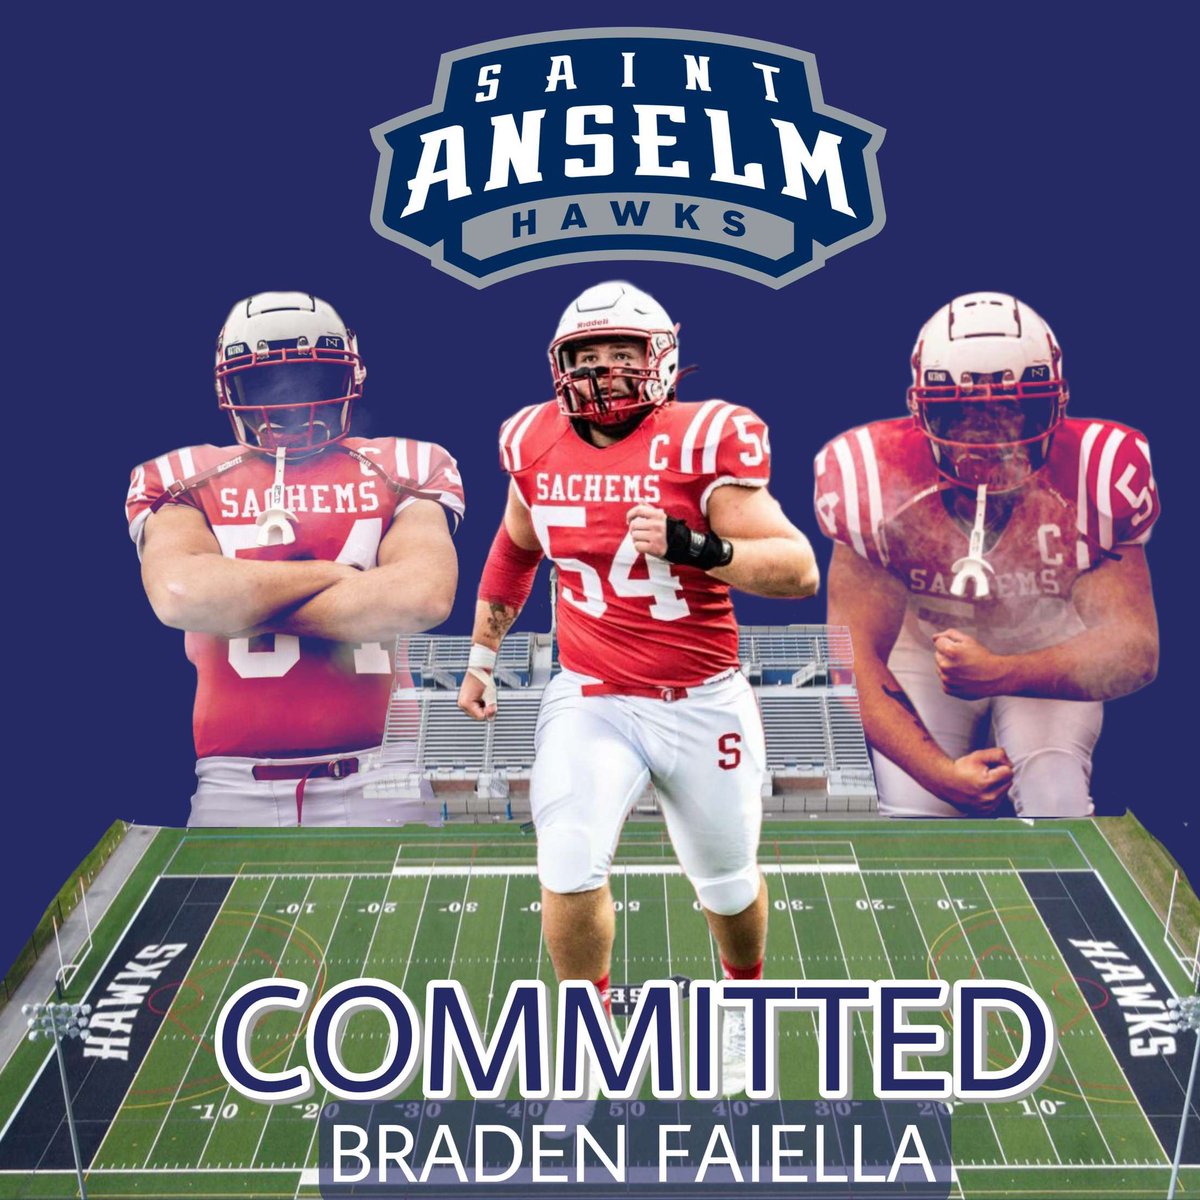 Excited to announce my commitment to @STAHawksFB to continue my academic and athletic career, can’t wait to get to work!!! #ROLLHAWKS #BCM @CoachPriceFerg @Coach_Bick @CoachBraine @CoachJoeAdam